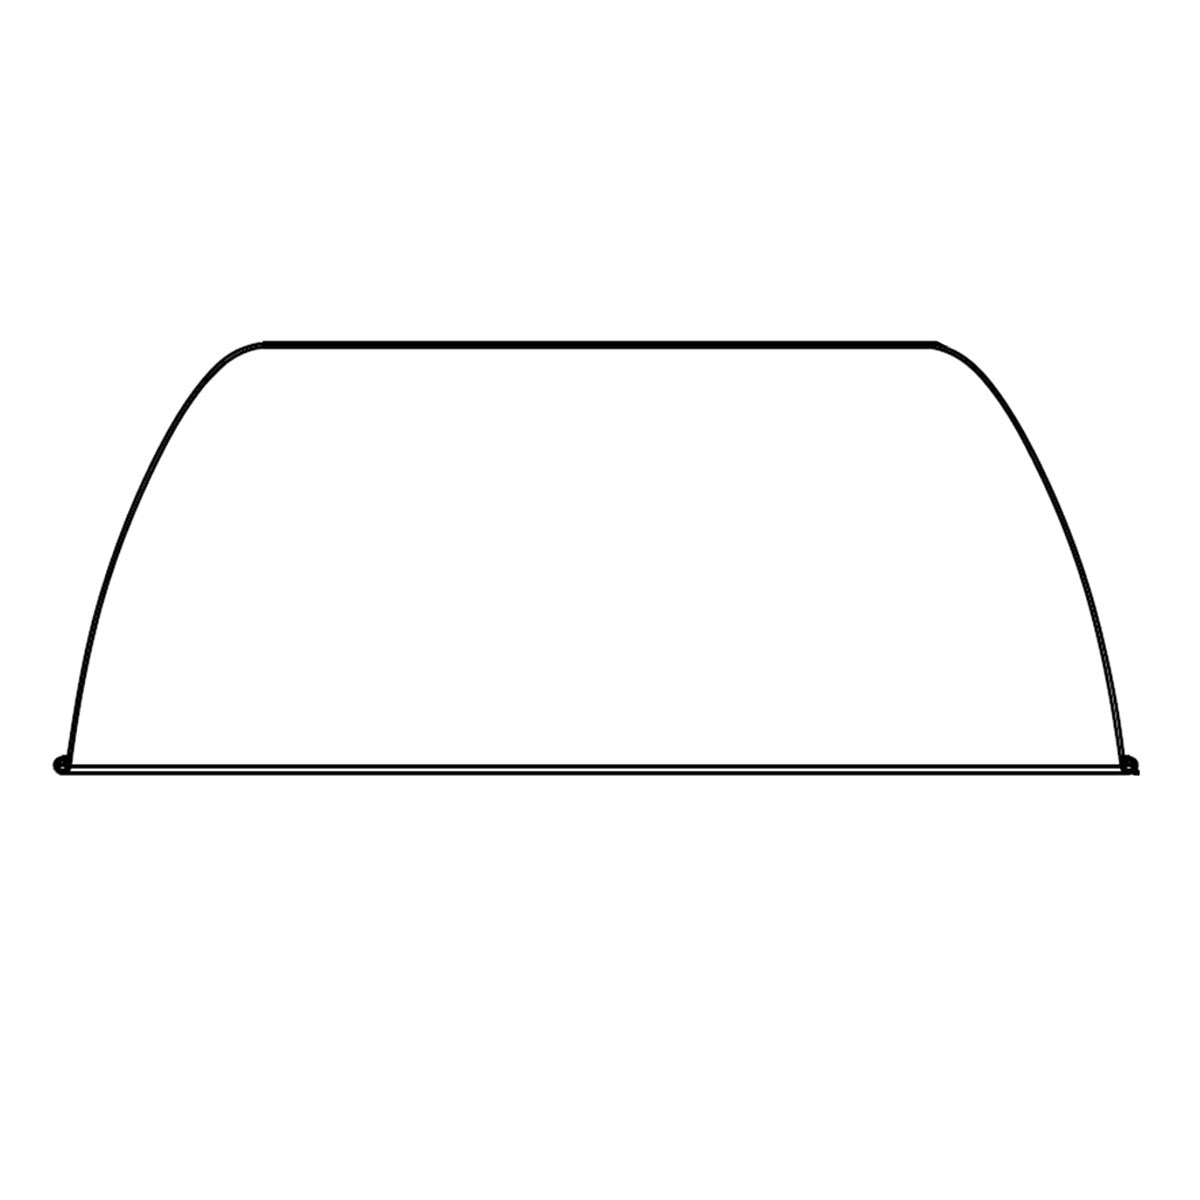 Sylvania UFO High Bay 3A Aluminum Reflector, For 200-240W Products